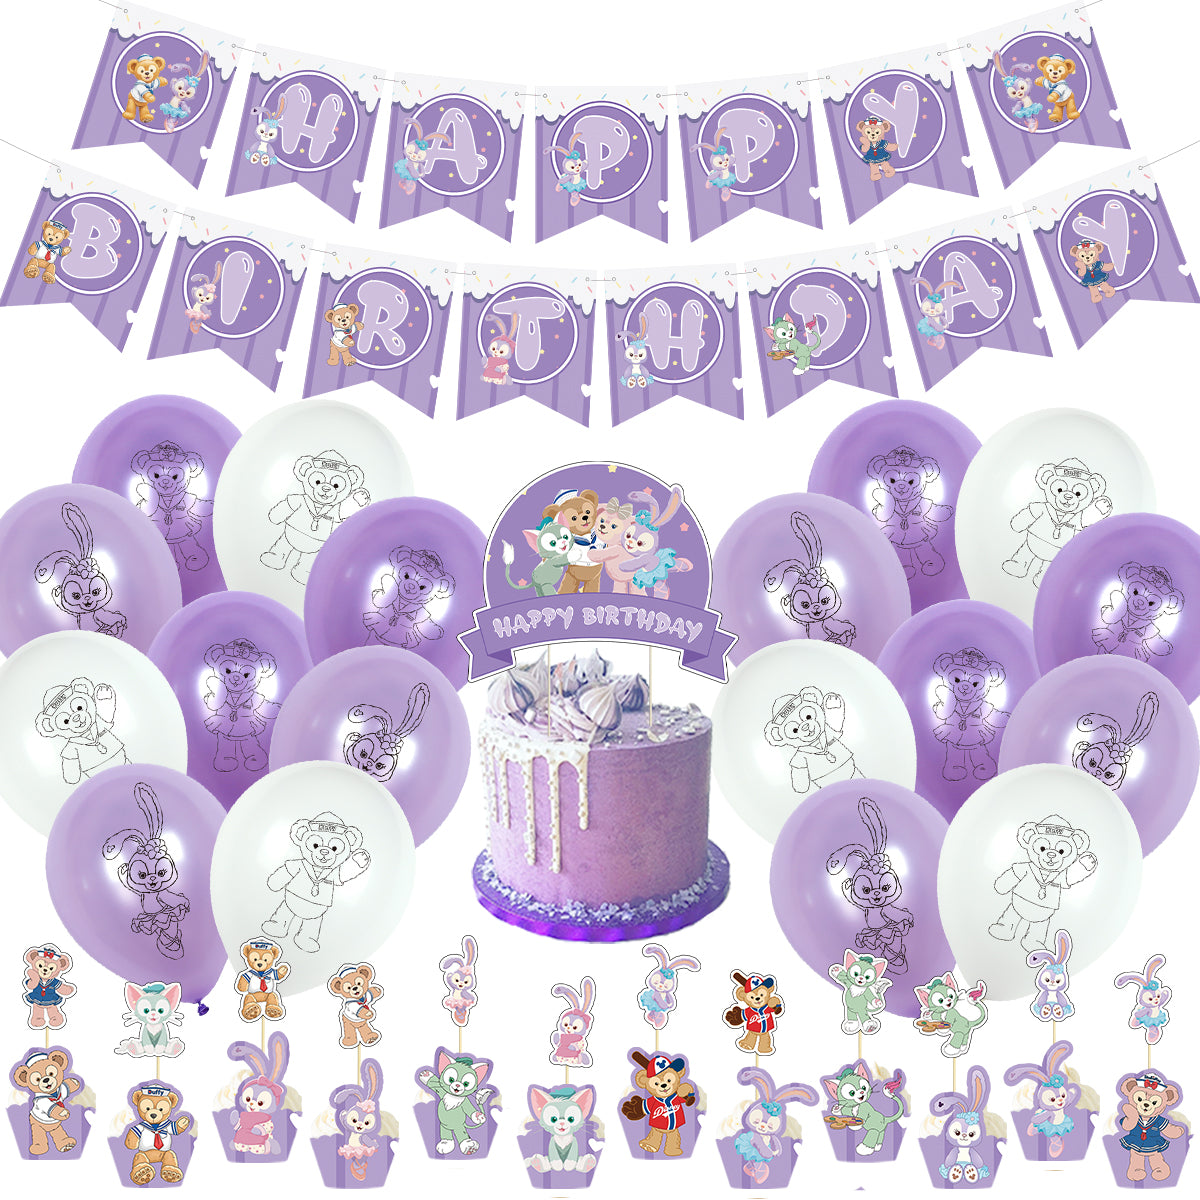 Duffy Bear and Friends Birthday Party Decorations - Party Corner - BM Trading